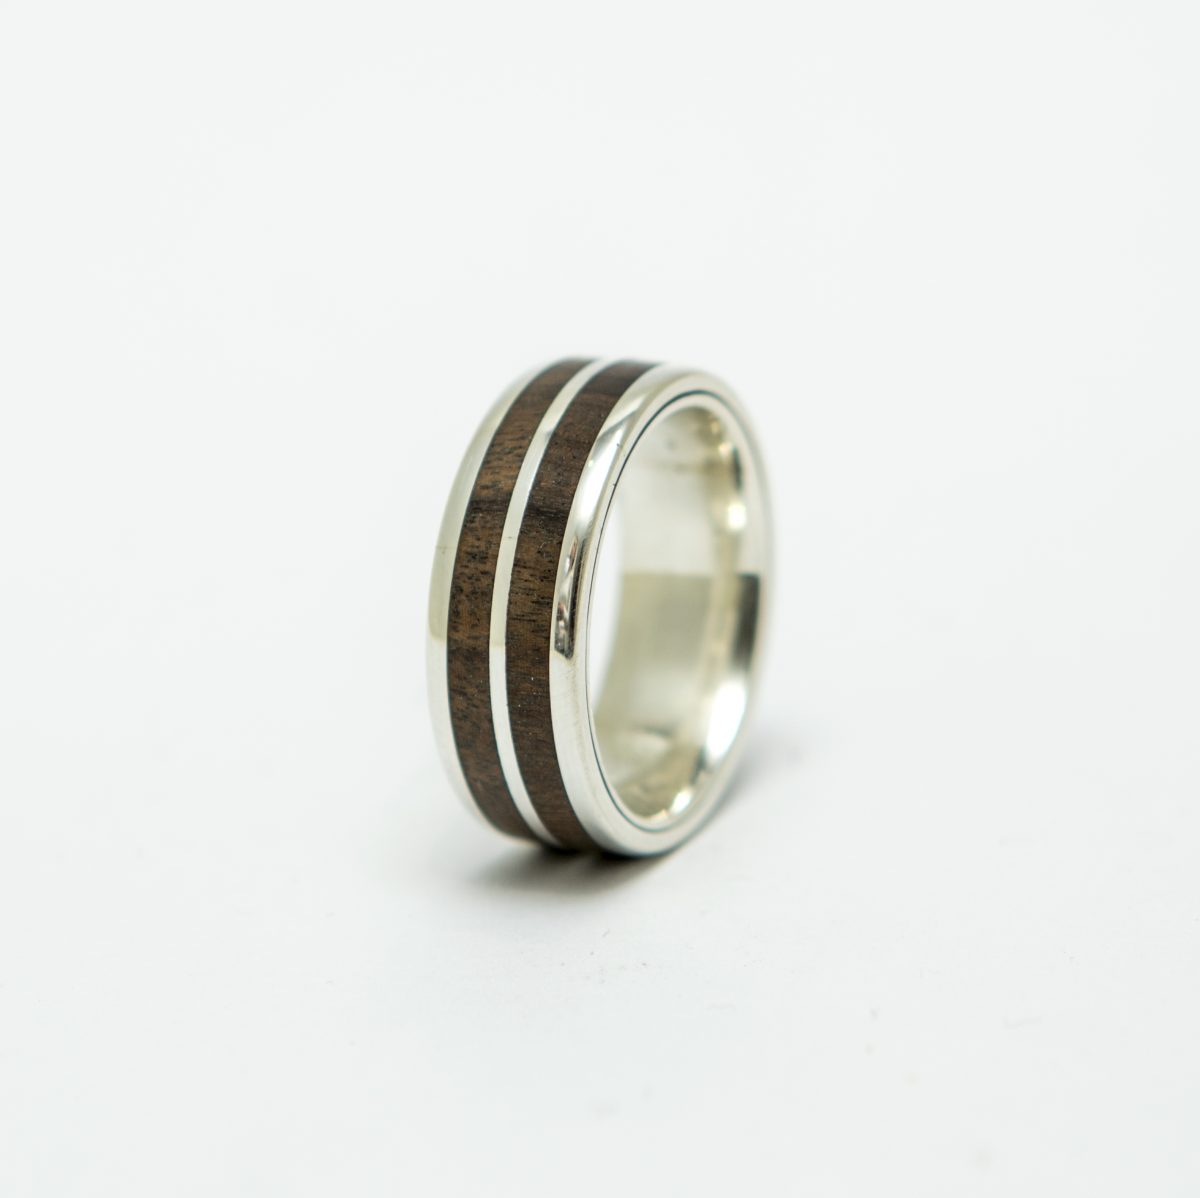 Wooden-ring-silver